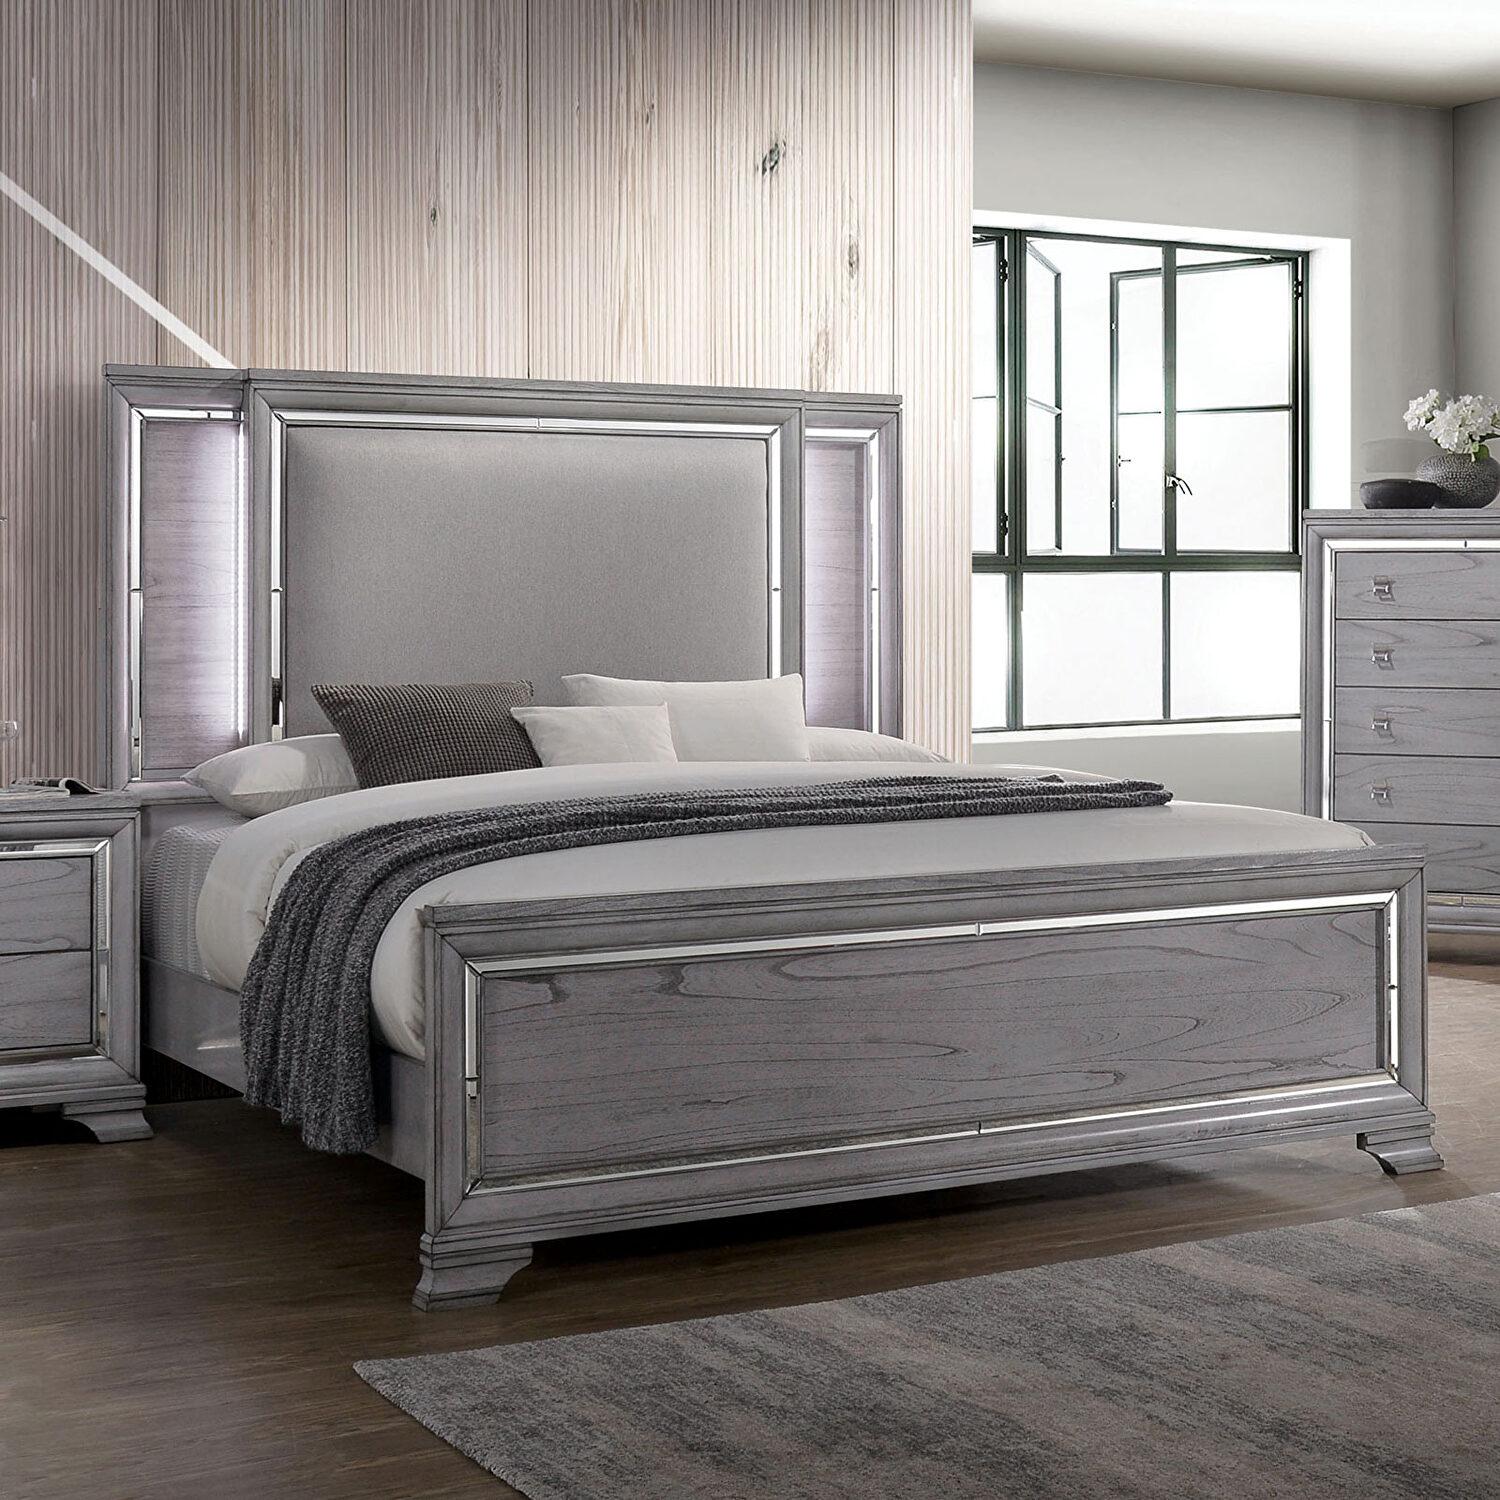 

    
Contemporary Light Gray Solid Wood King Bedroom Set 5pcs Furniture of America CM7579 Alanis
